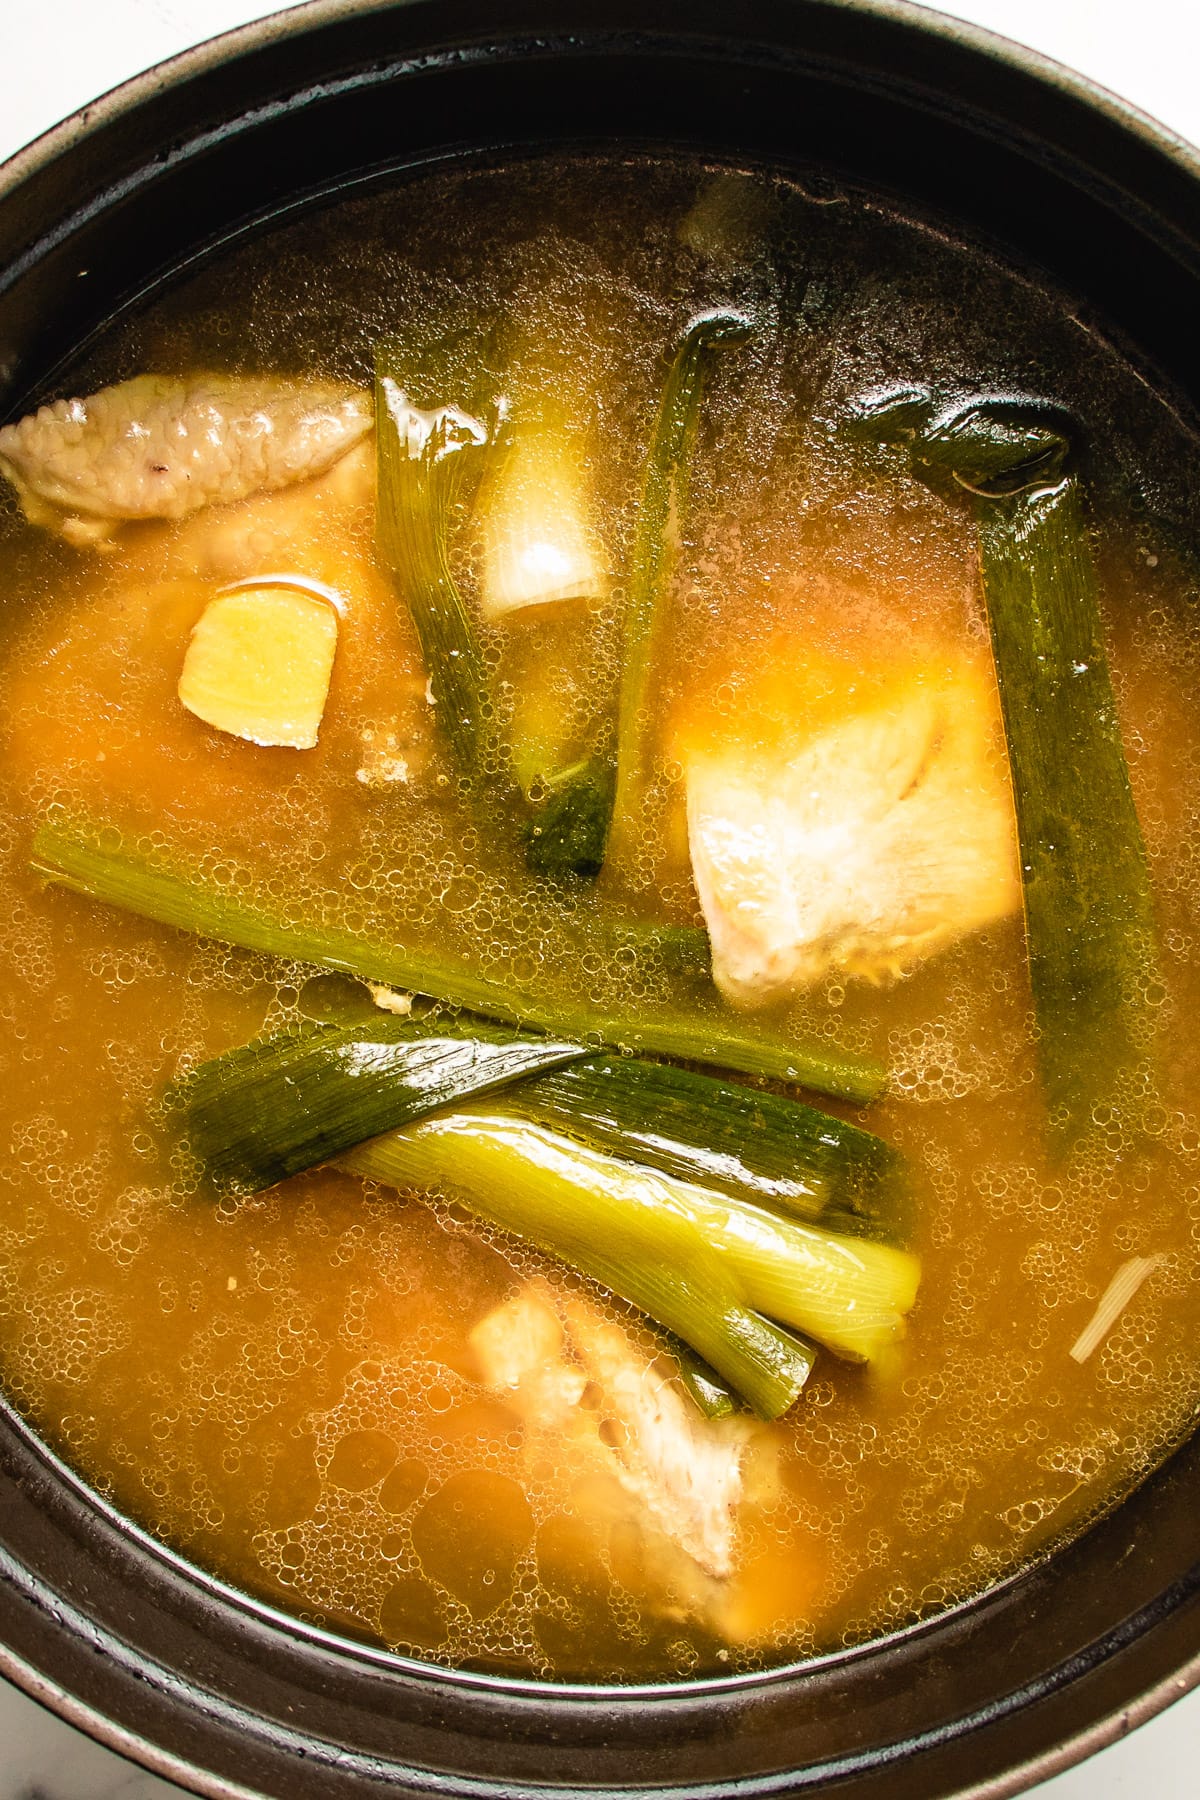 A photo shows the chicken broth made from scratch for low carb egg drop soup use.